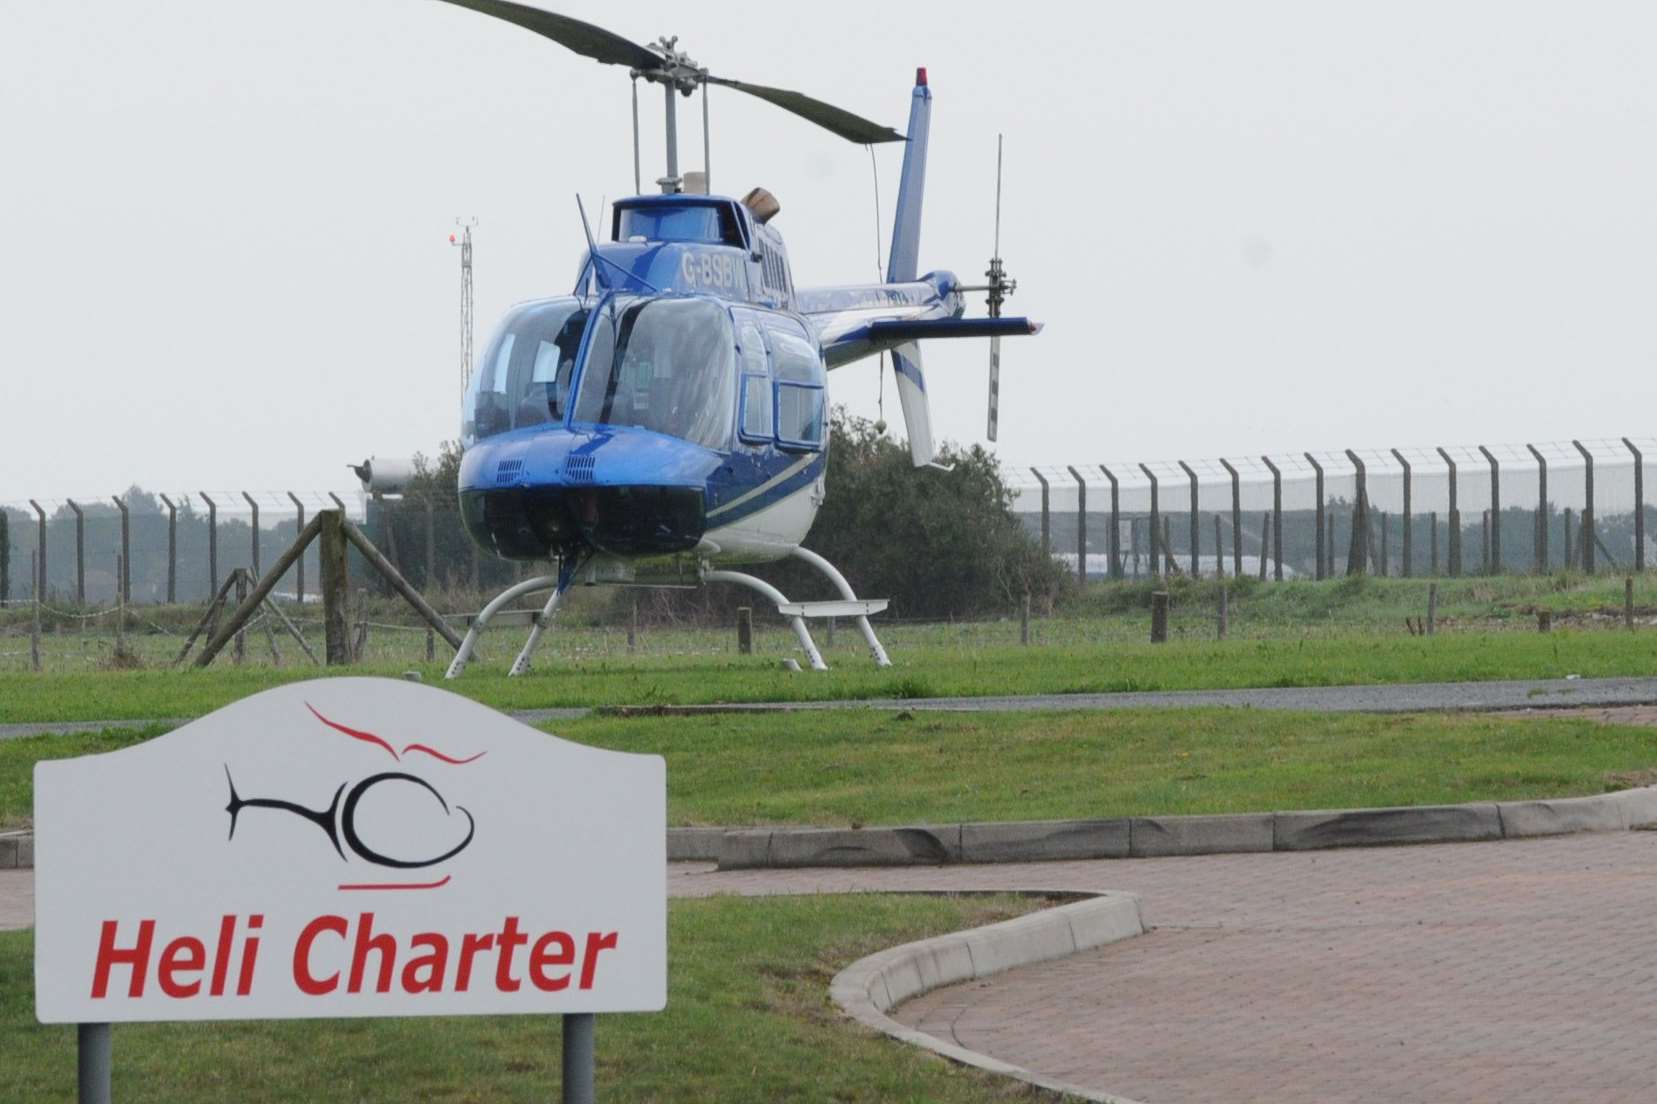 Heli Charter is based in Manston